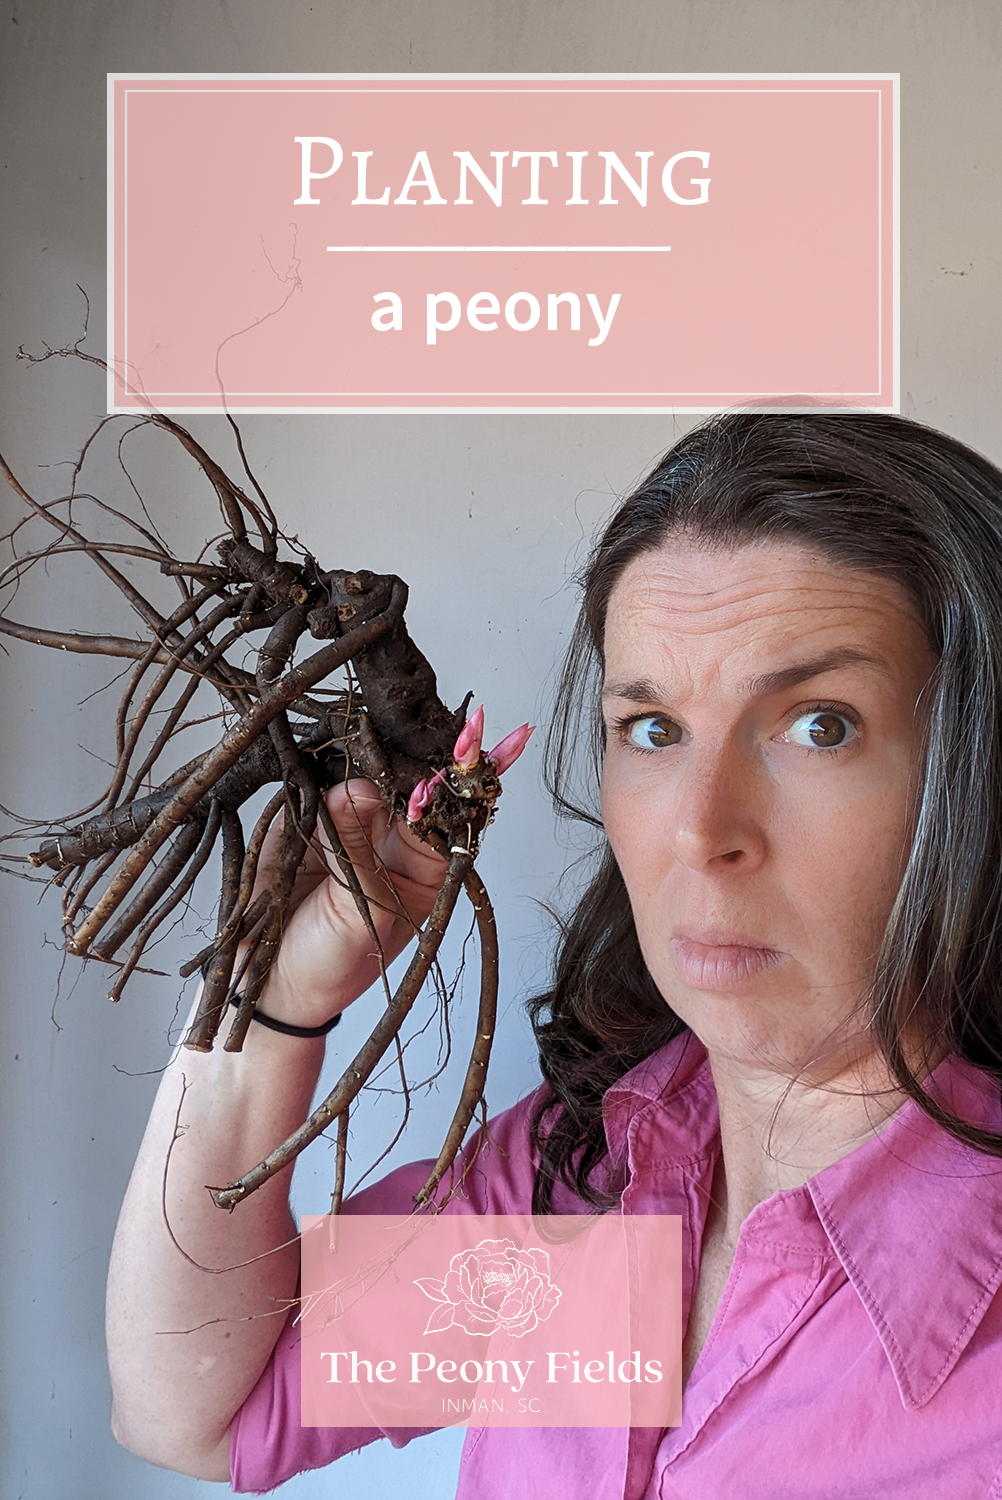 Planting a peony. A woman holds a gnarly peony root and looks quizzically at the camera.